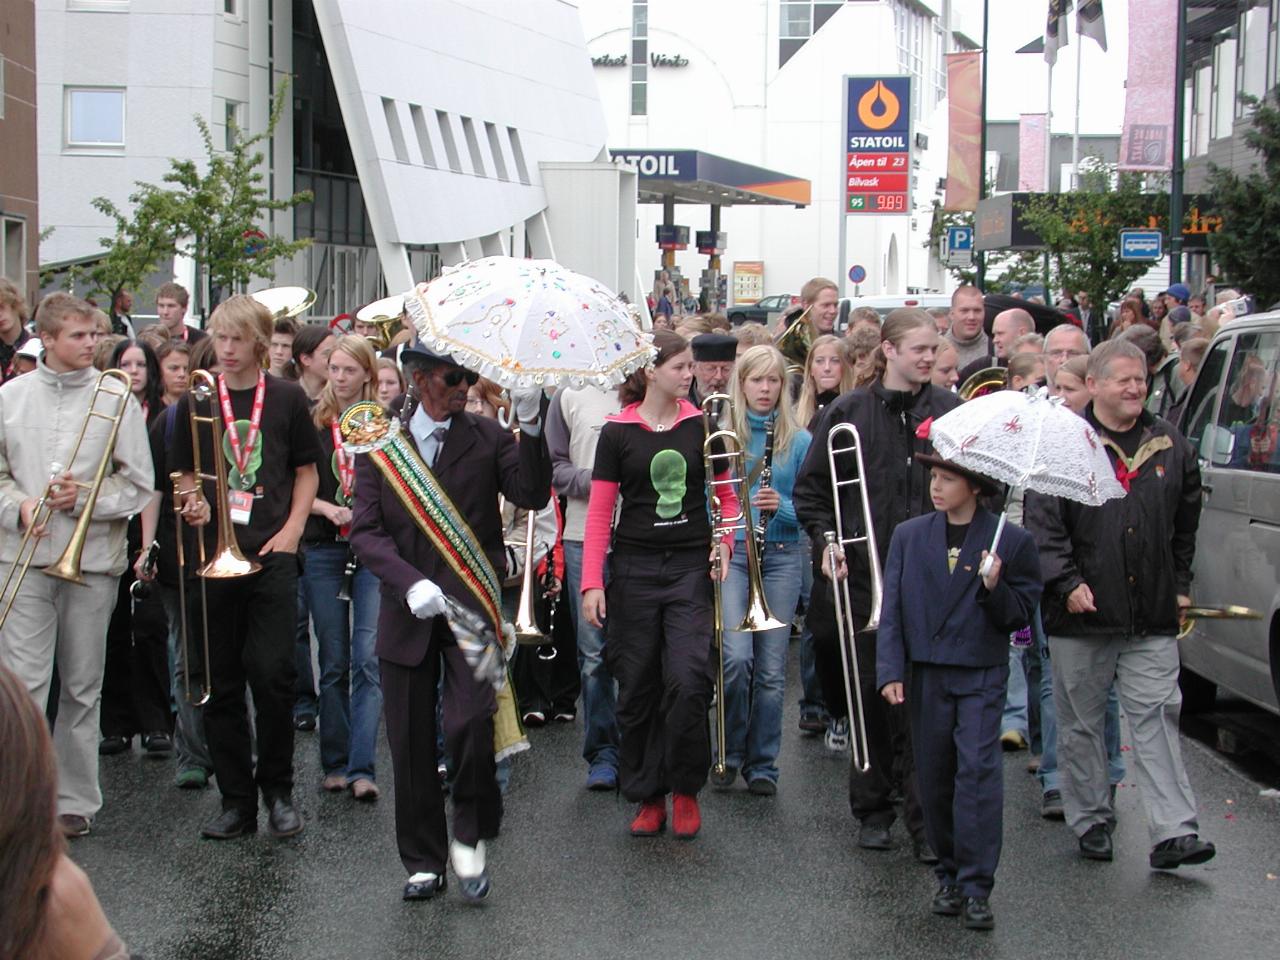 KPLU Viking Jazz: The Marching Band Parade forming up on the main street in Molde